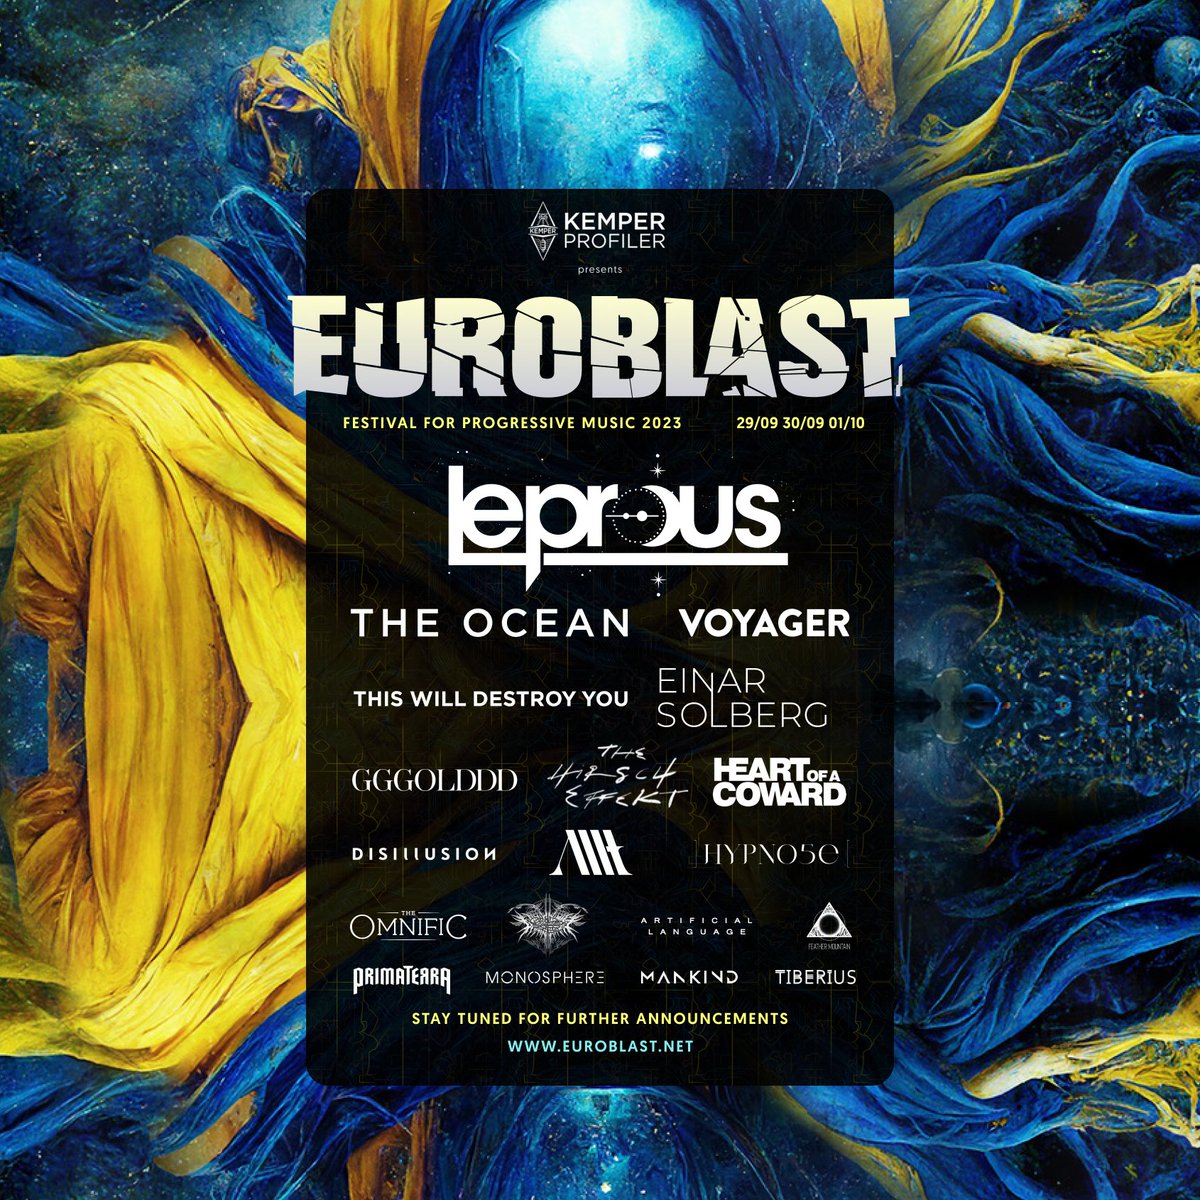 THE OMNIFIC x EUROBLAST We're thrilled to bring the bass to @Euroblast_Fest later this year with a stack of great bands! Tix: tickets.euroblast.net #EuroblastFestival2023 #Euroblast